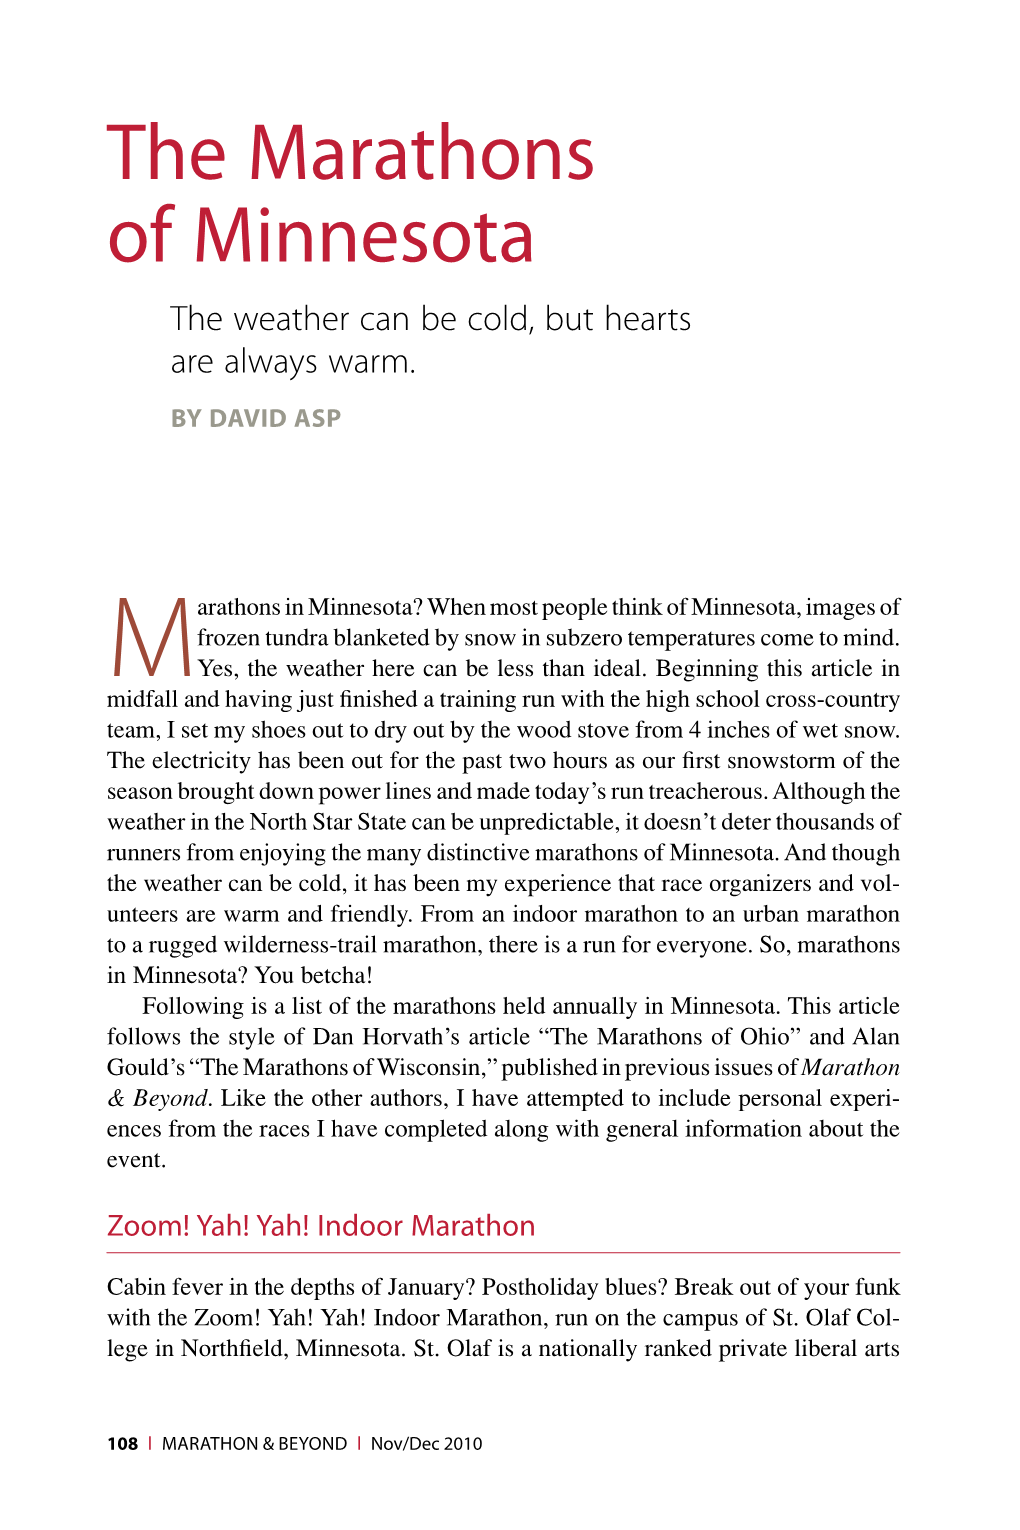 The Marathons of Minnesota the Weather Can Be Cold, but Hearts Are Always Warm